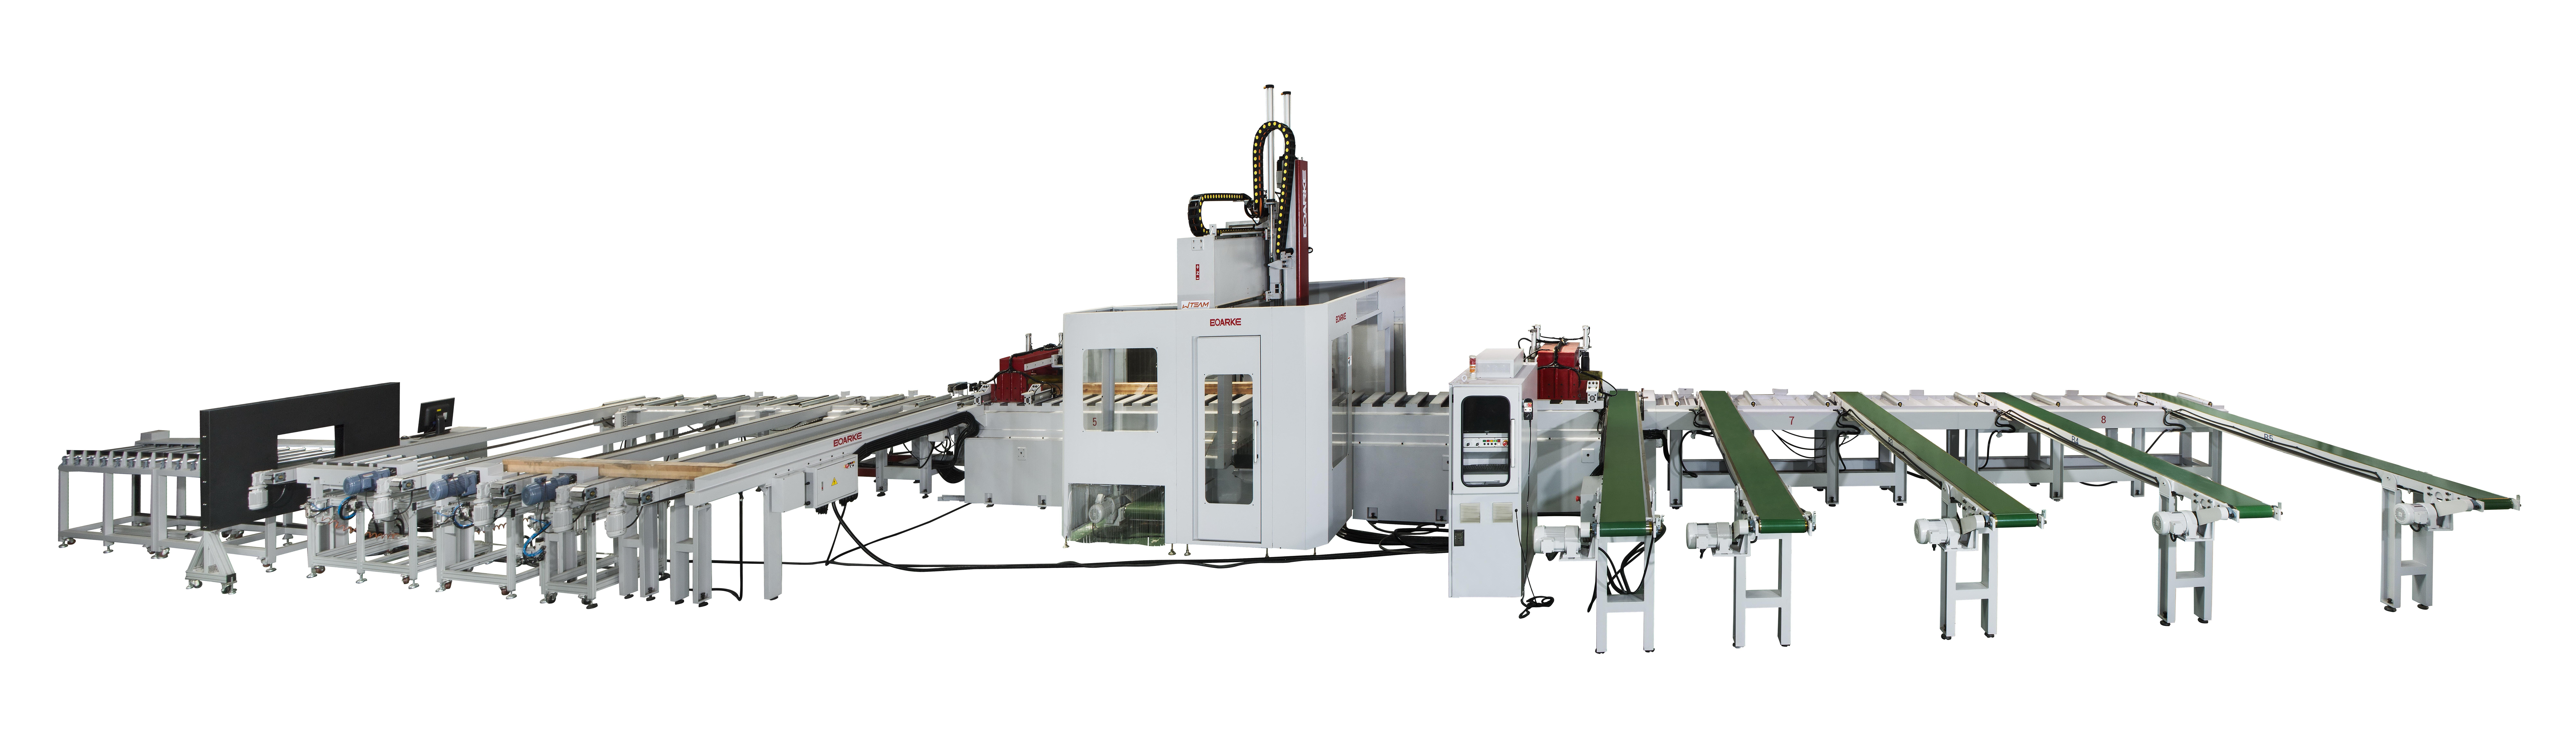 Boarke 6-axis CNC production line